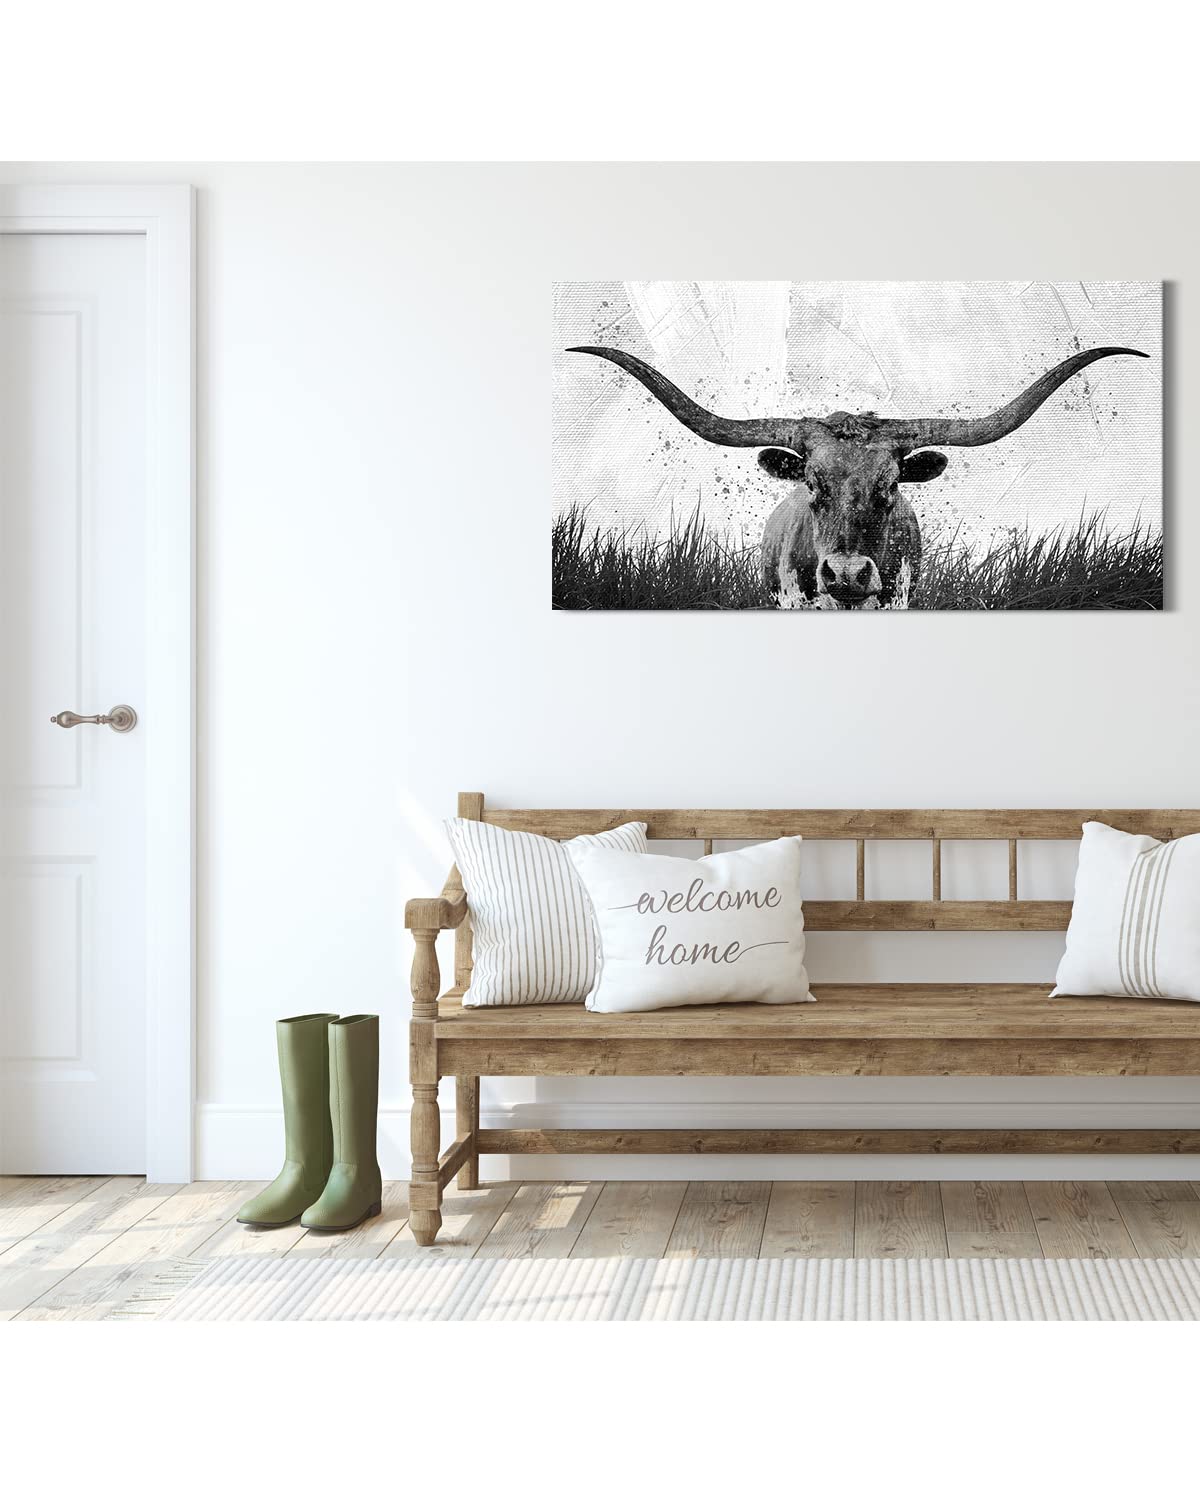 Govivo Longhorn Wall Art - Rustic Farmhouse Decor - Cowboy and Western Decor - Ranch Style Decor for the Home - Western Decorations for Home - Minimalist Wall Art